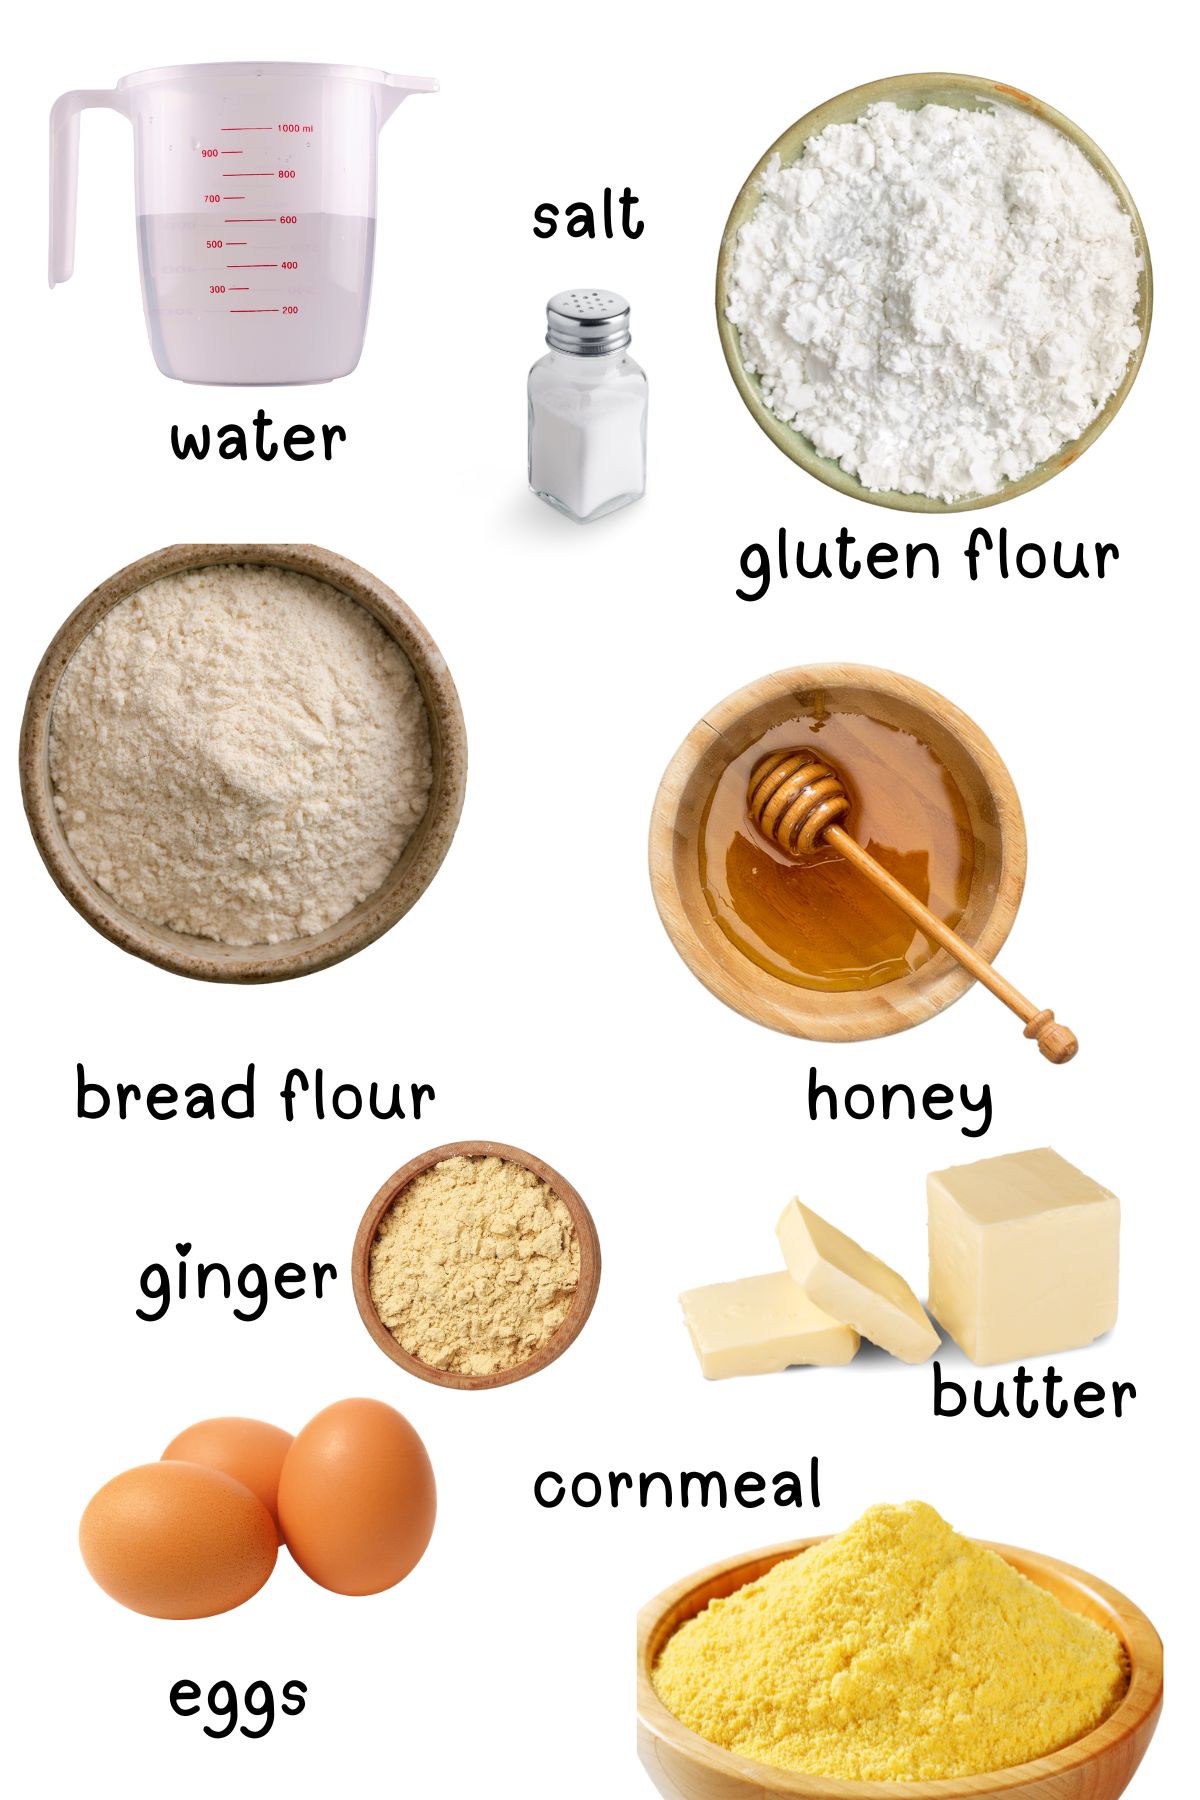 Labeled ingredients for cornmeal sandwich rolls.